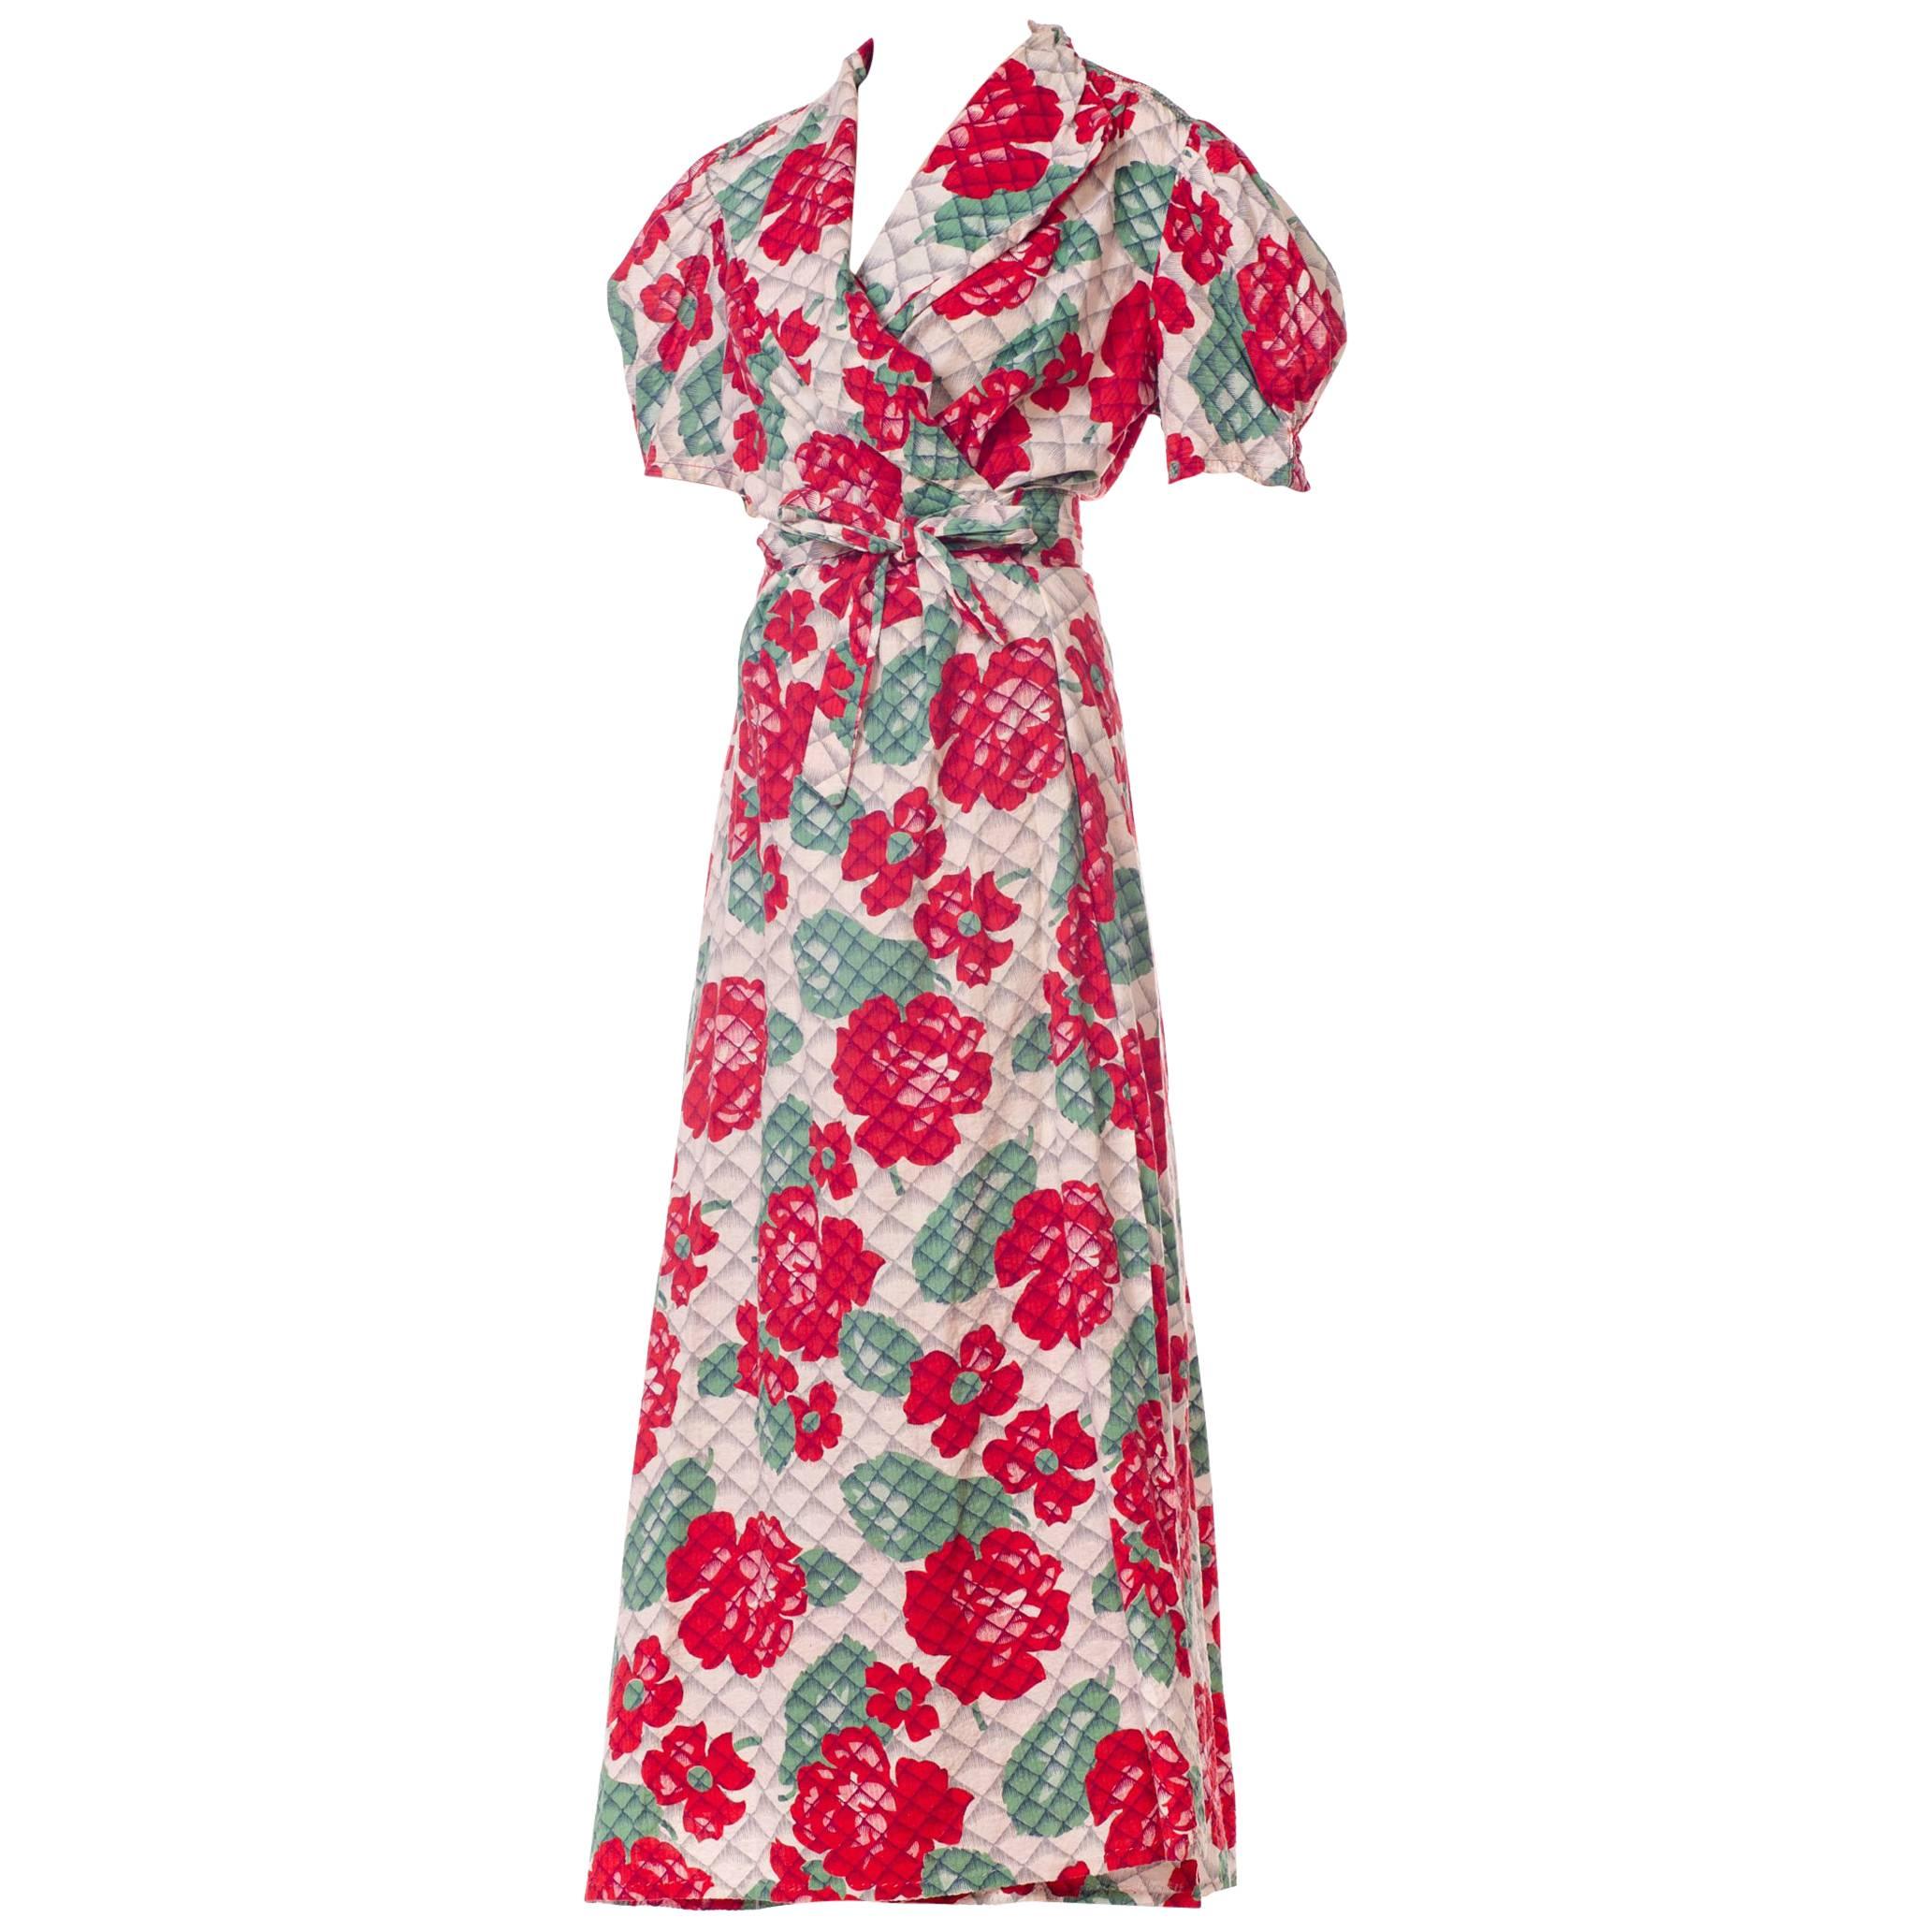 1930s 1940s Cotton Floral Quilted Wrap Dress